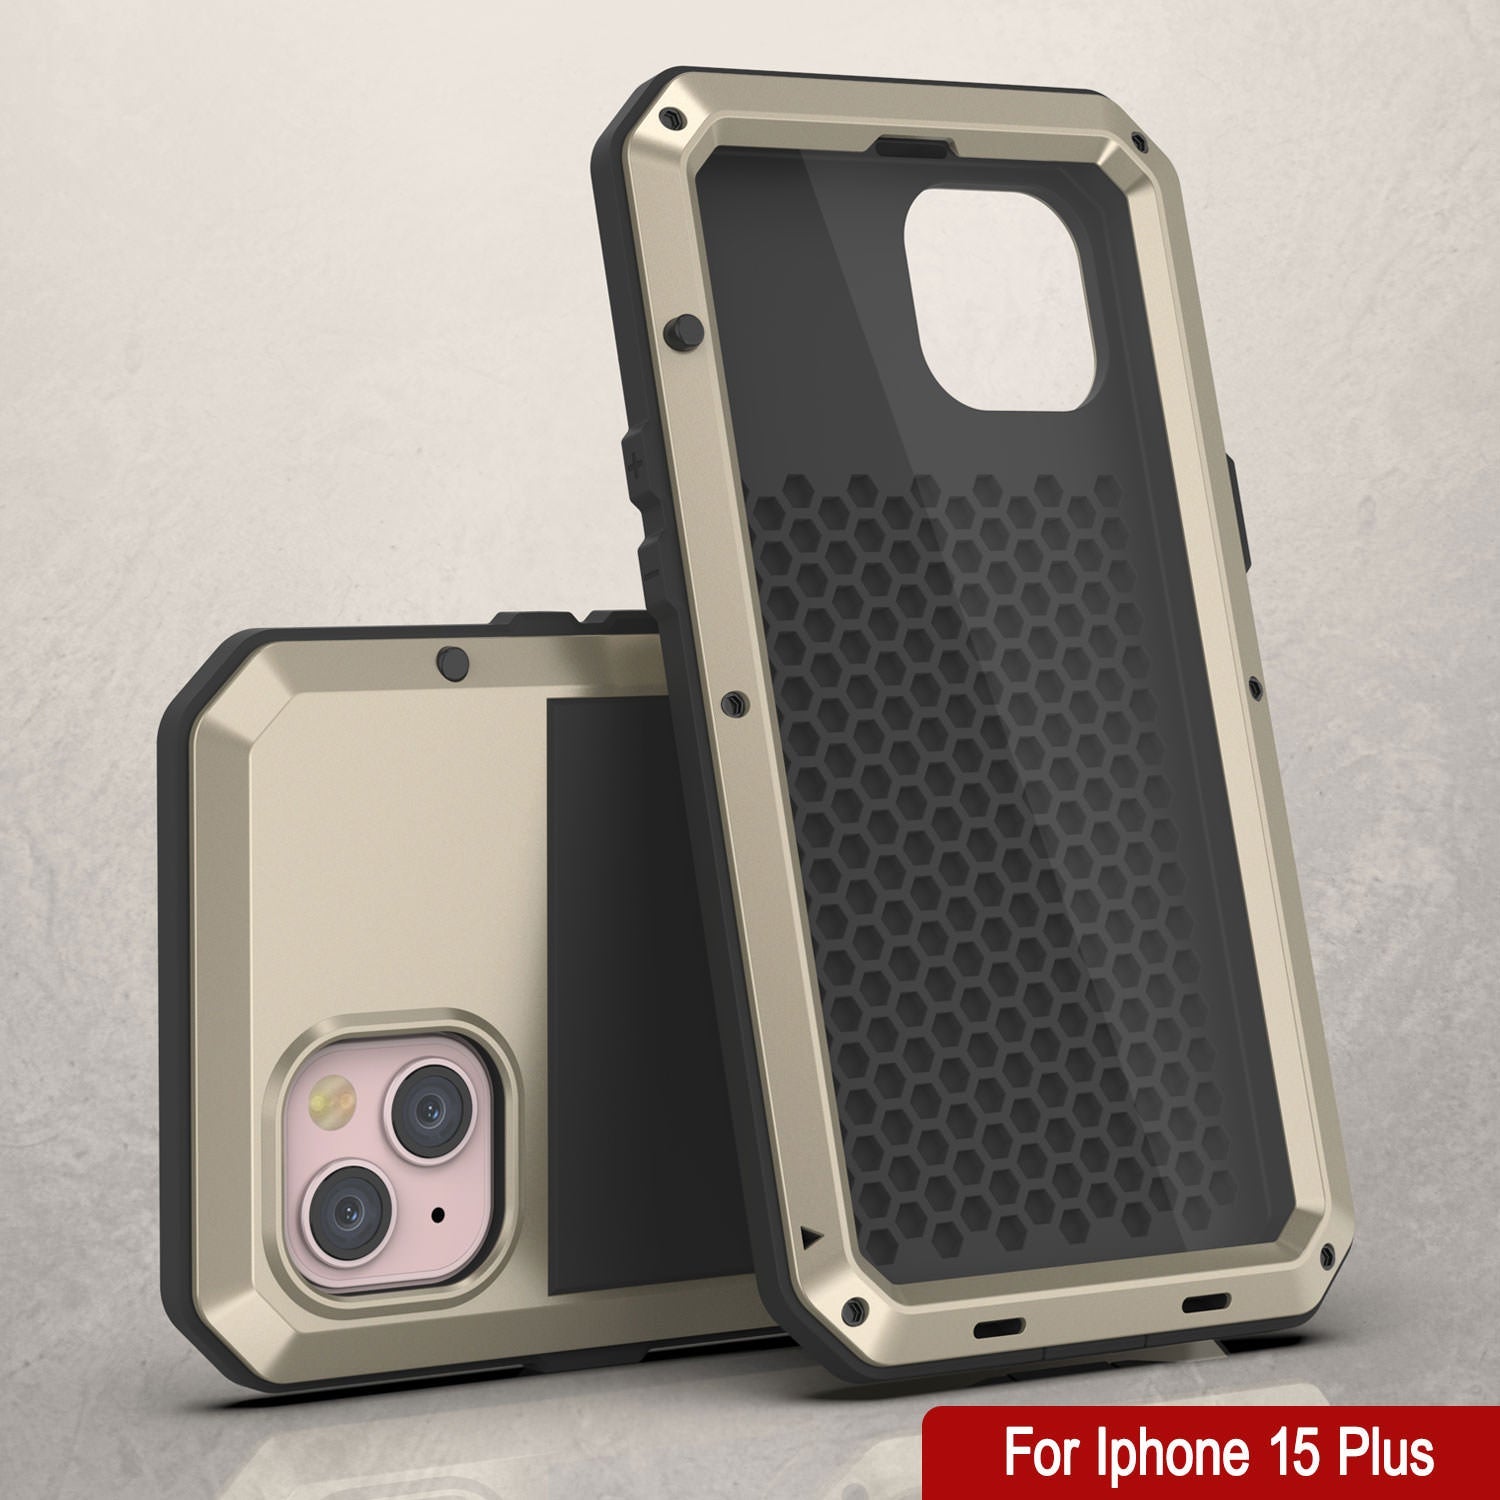 iPhone 15 Plus Metal Case, Heavy Duty Military Grade Armor Cover [shock proof] Full Body Hard [Gold]